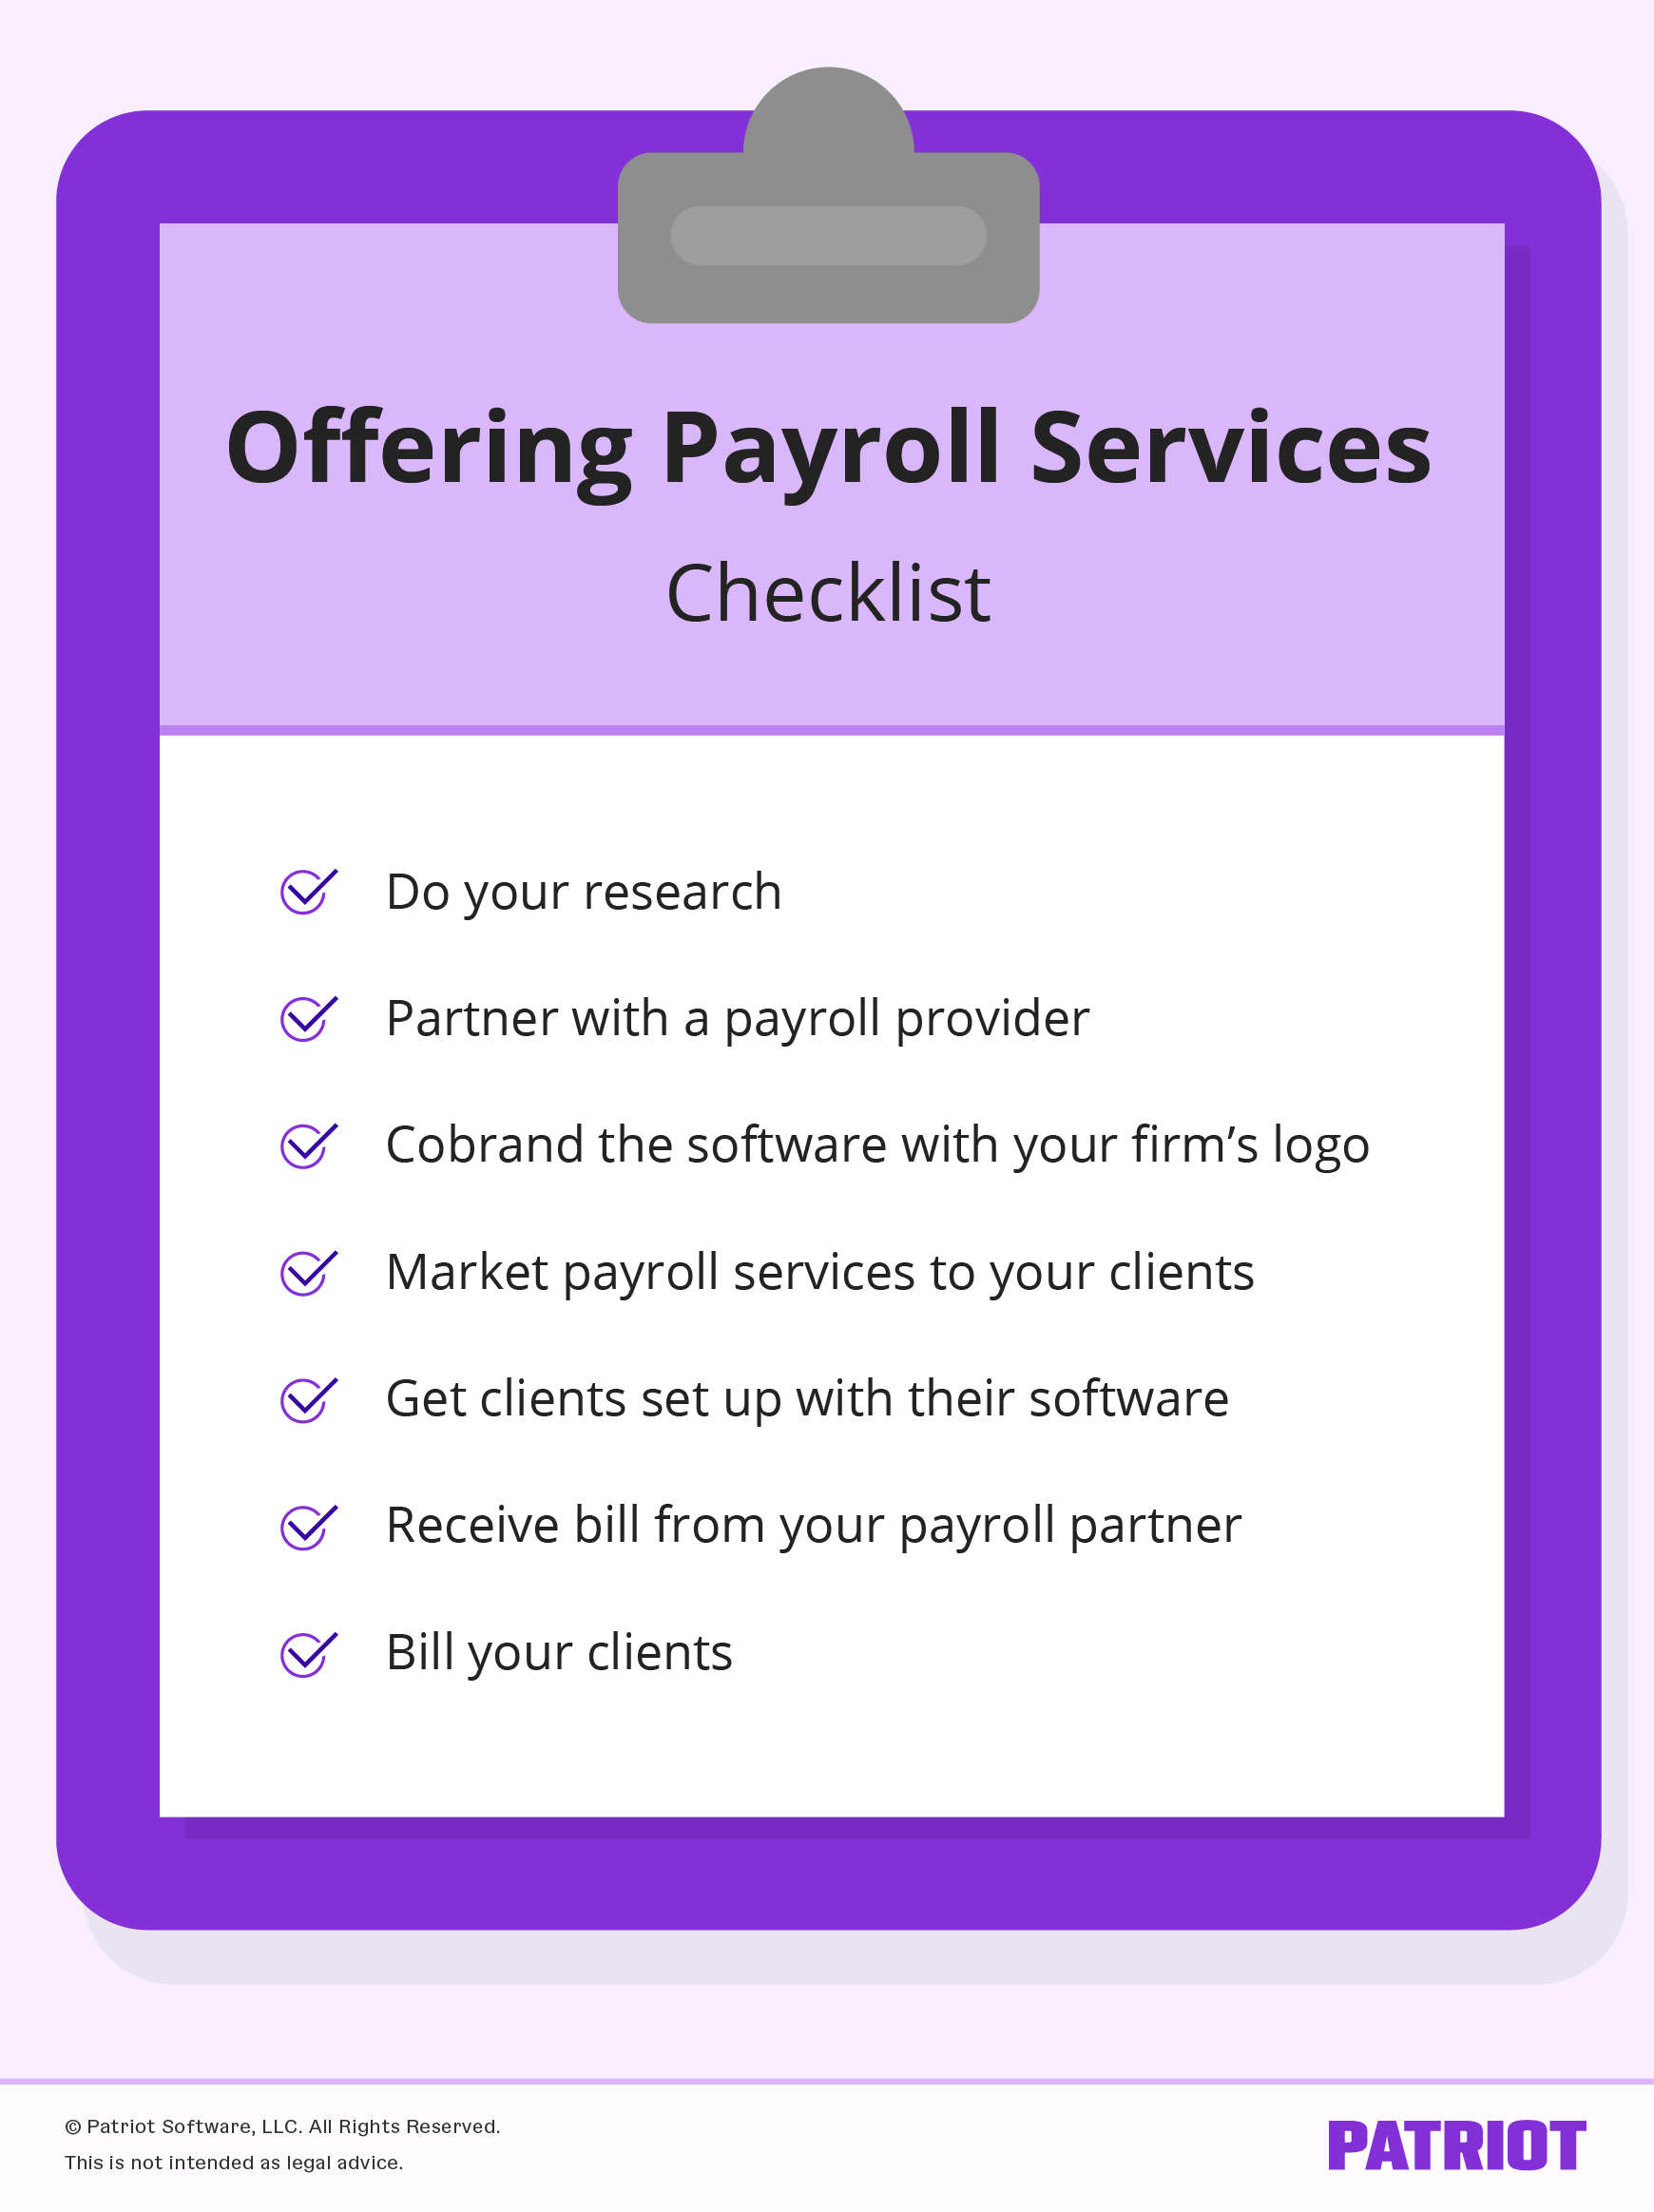 1. Do your research 2. Partner with a payroll provider 3. Cobrand the software with your firm’s logo 4. Market payroll services to your clients 5. Get clients set up with their software 6. Receive bill from your payroll partner 7. Bill your clients 